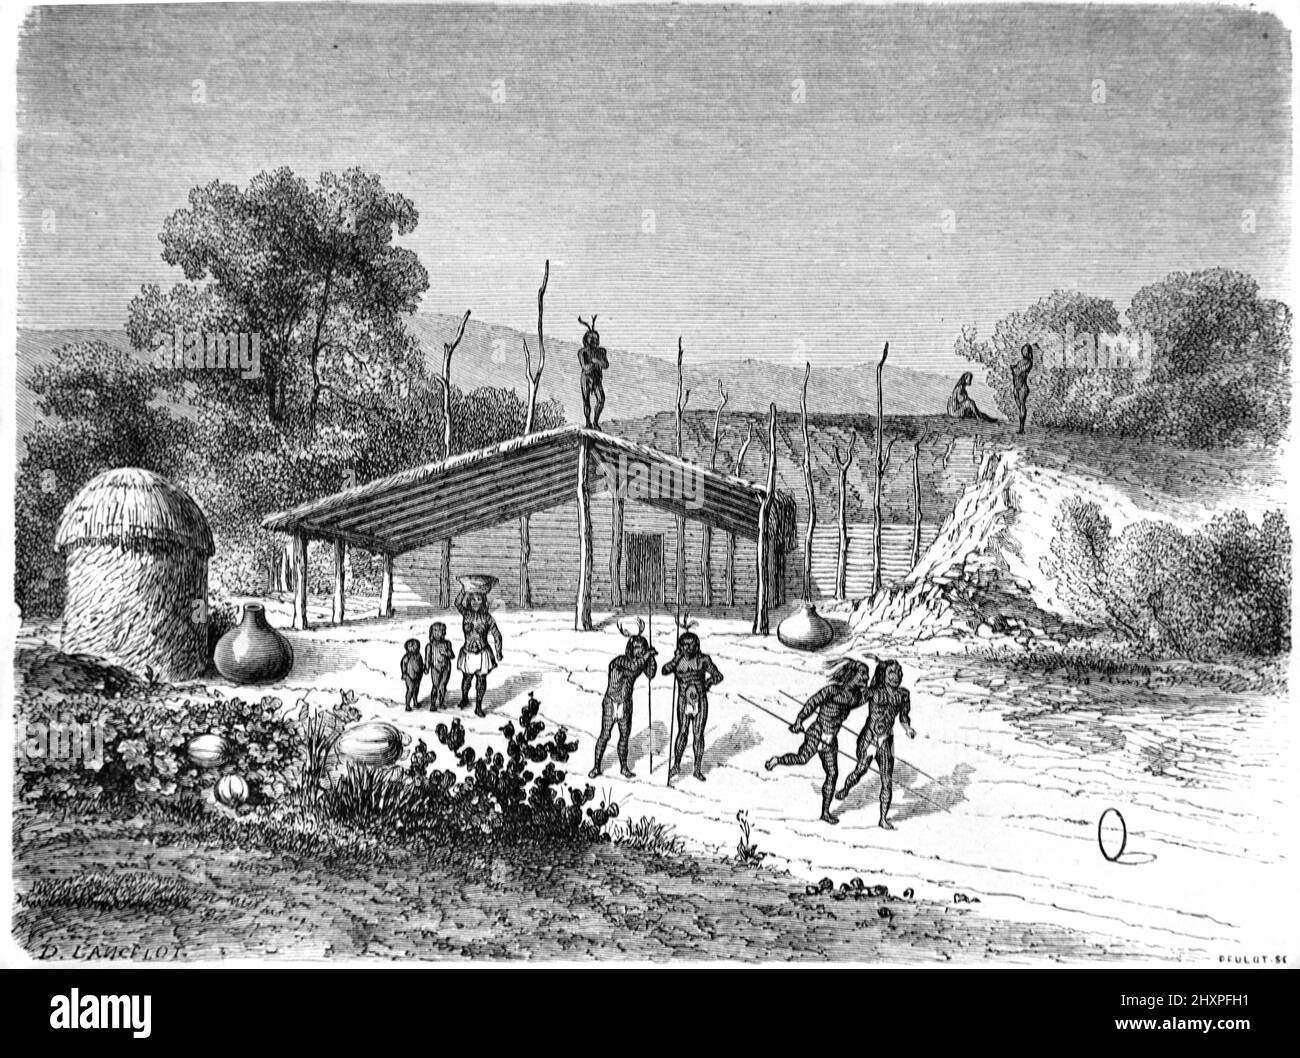 Game of Hoops, Hoop Rolling or Hoop Trundling Among the Mohave, Mohaves, Mojaves or Mojave Native Americans US, USA or United States of America. Vintage Illustration or Engraving 1860. Stock Photo